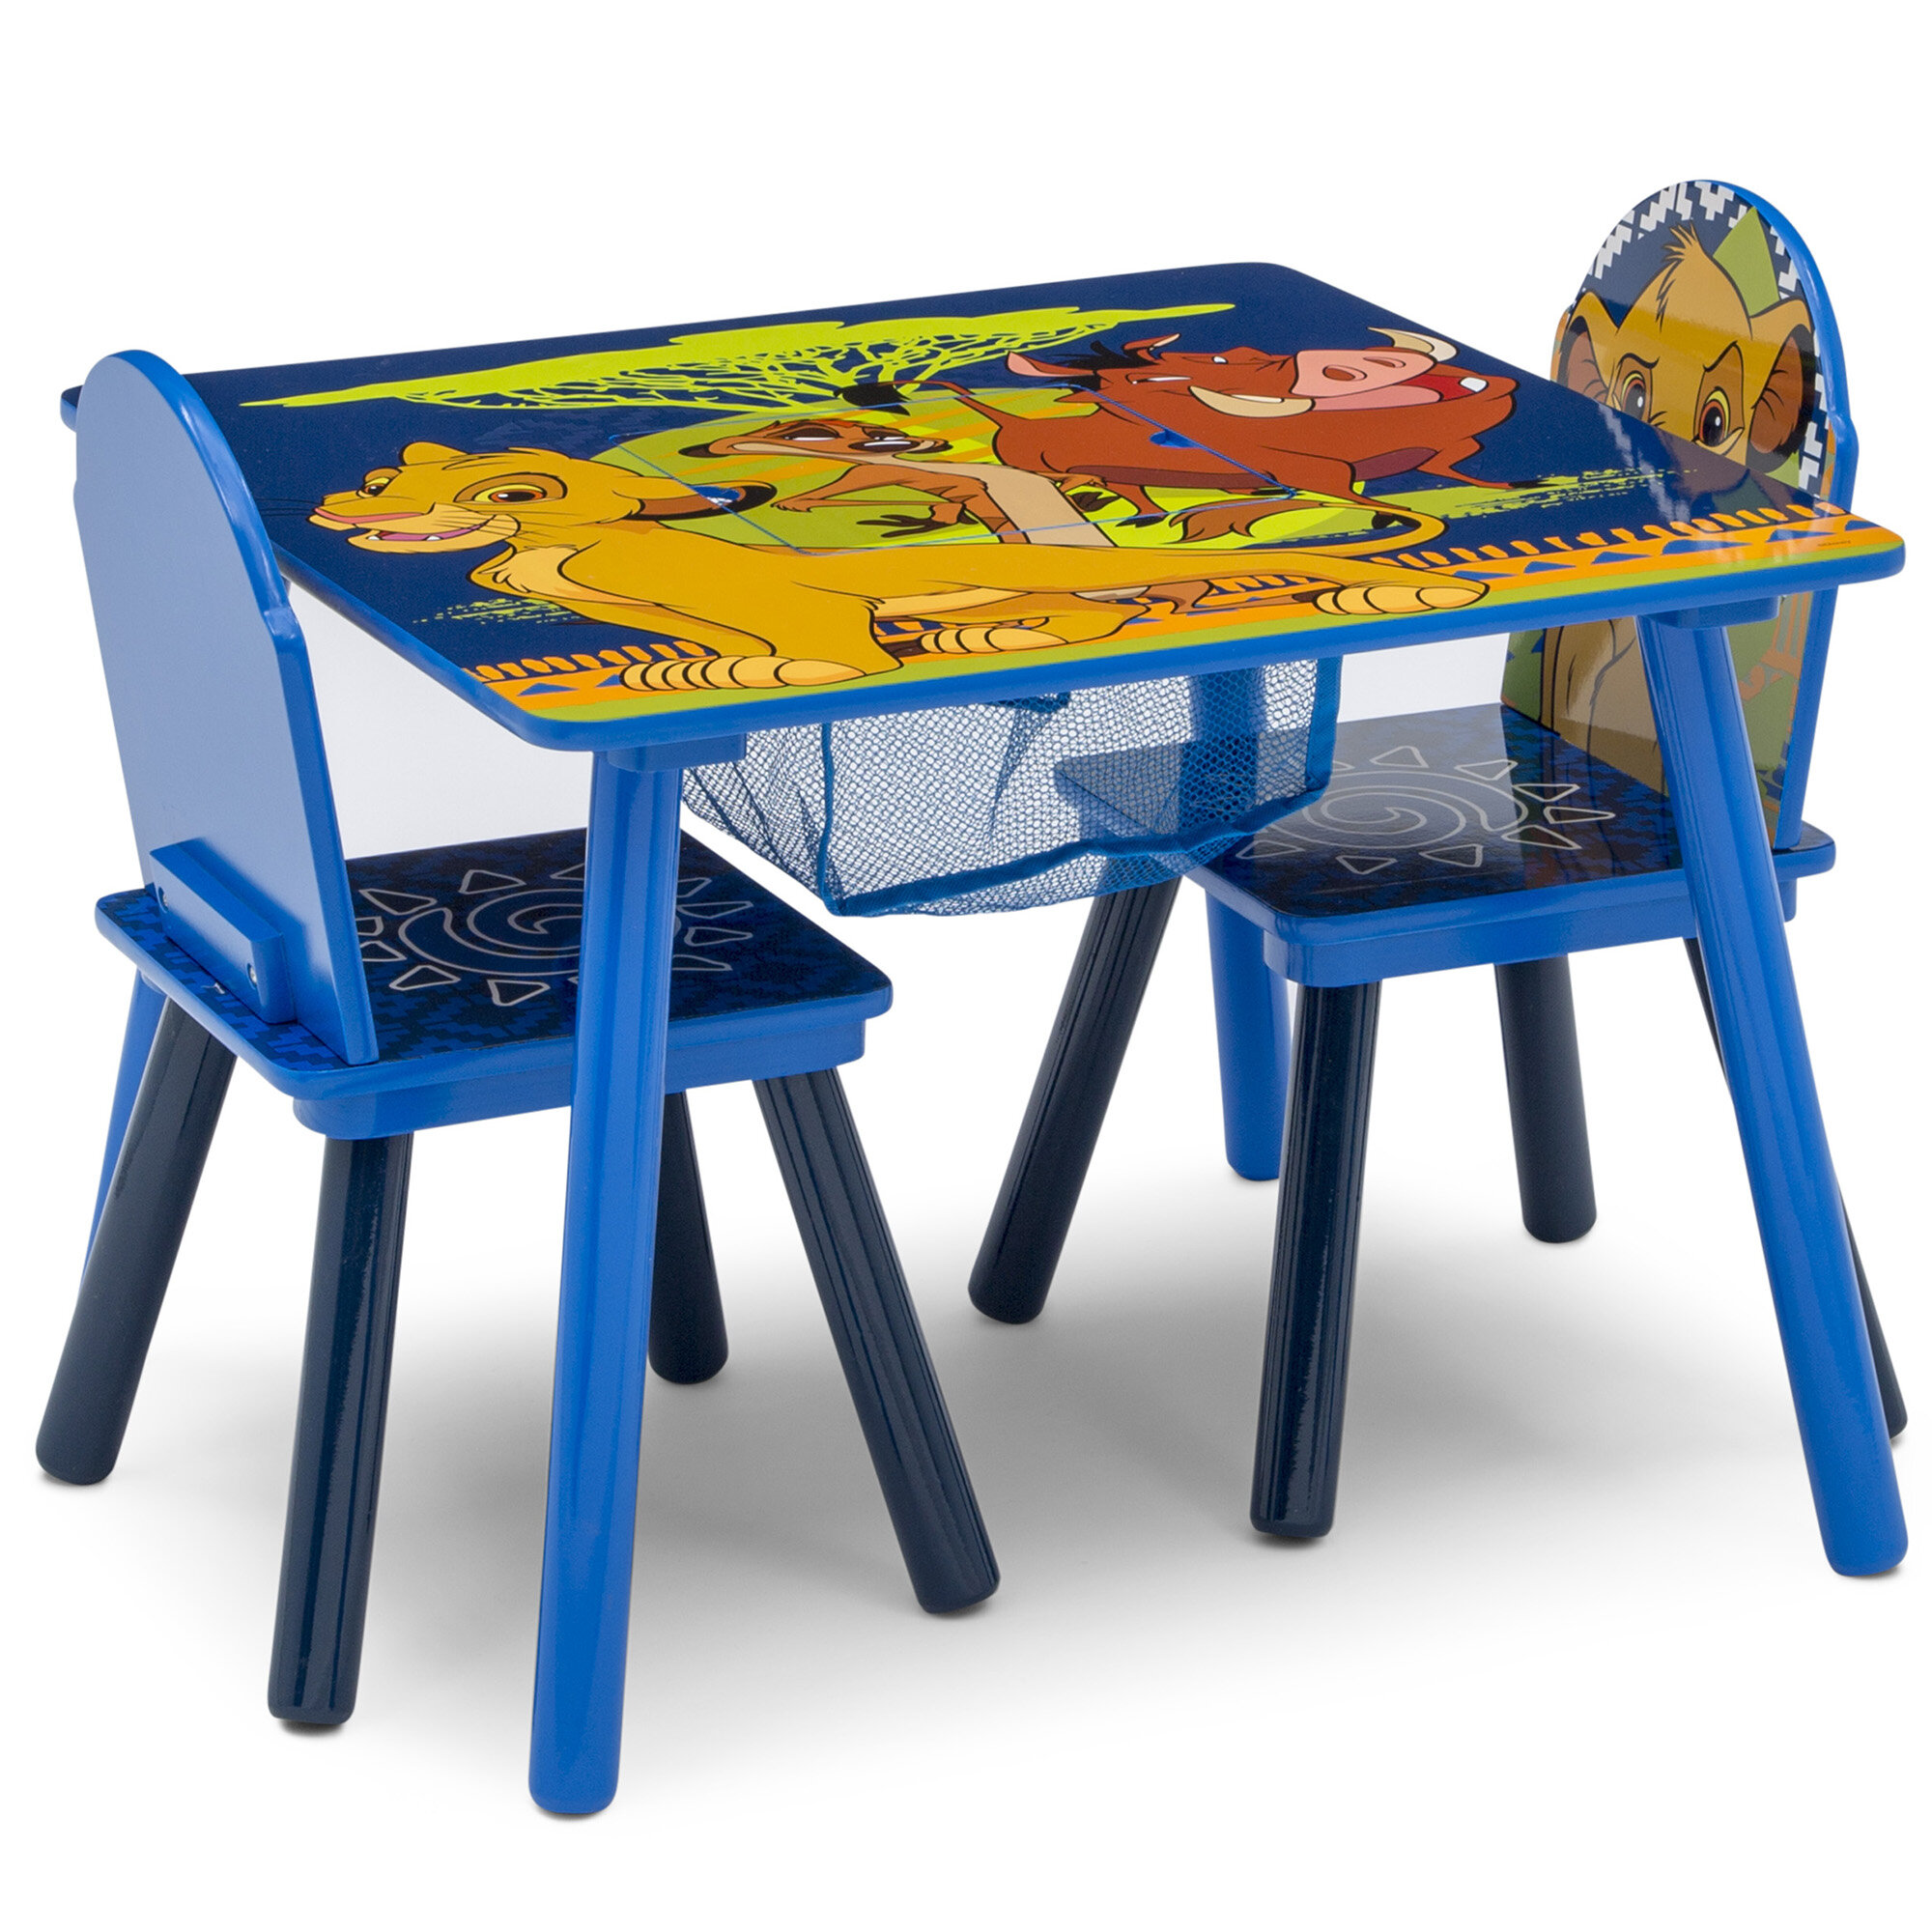 Delta Children Kids Table & Chair Set with Storage 2 Chairs Included Disney The Lion King 